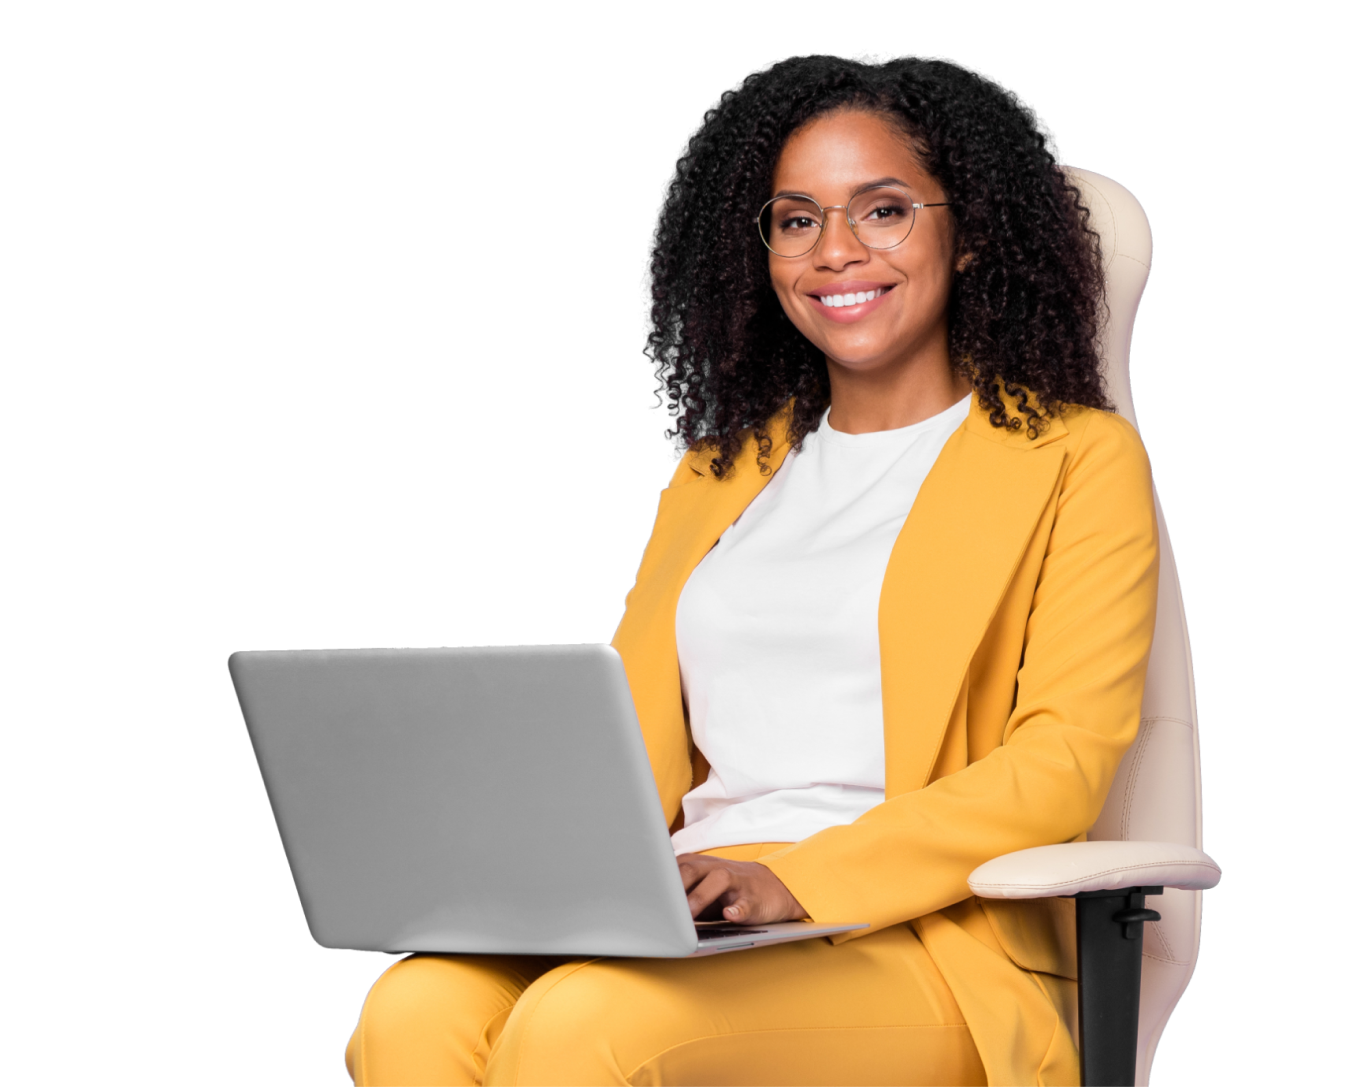 woman sitting in work chair with laptop on her lap smiling at camera